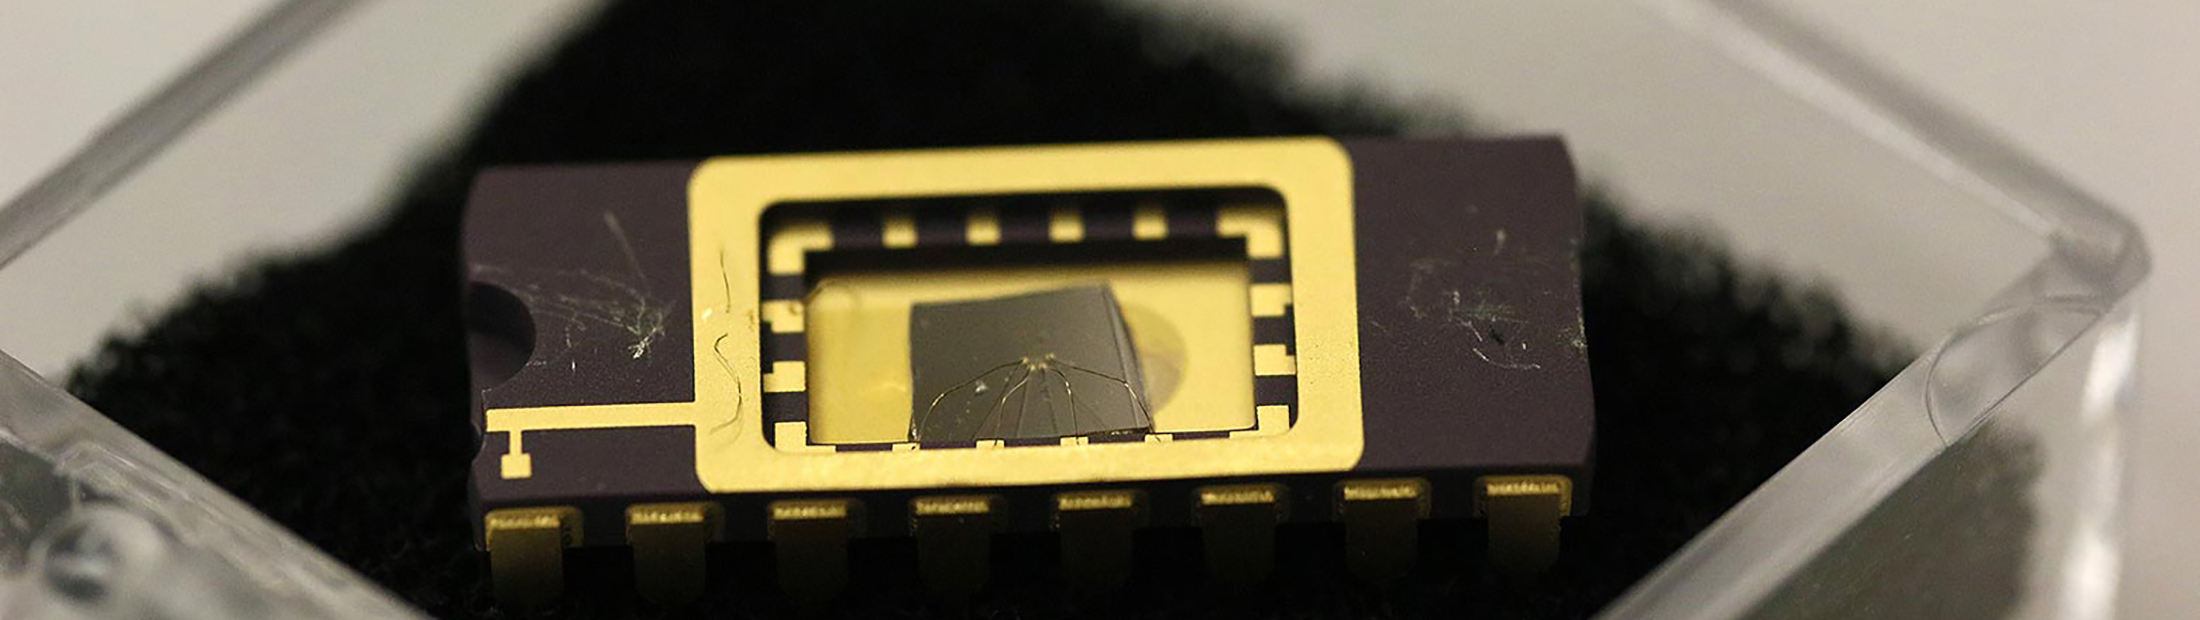 a close up image of a graphene field-effect transistor developed at purdue university